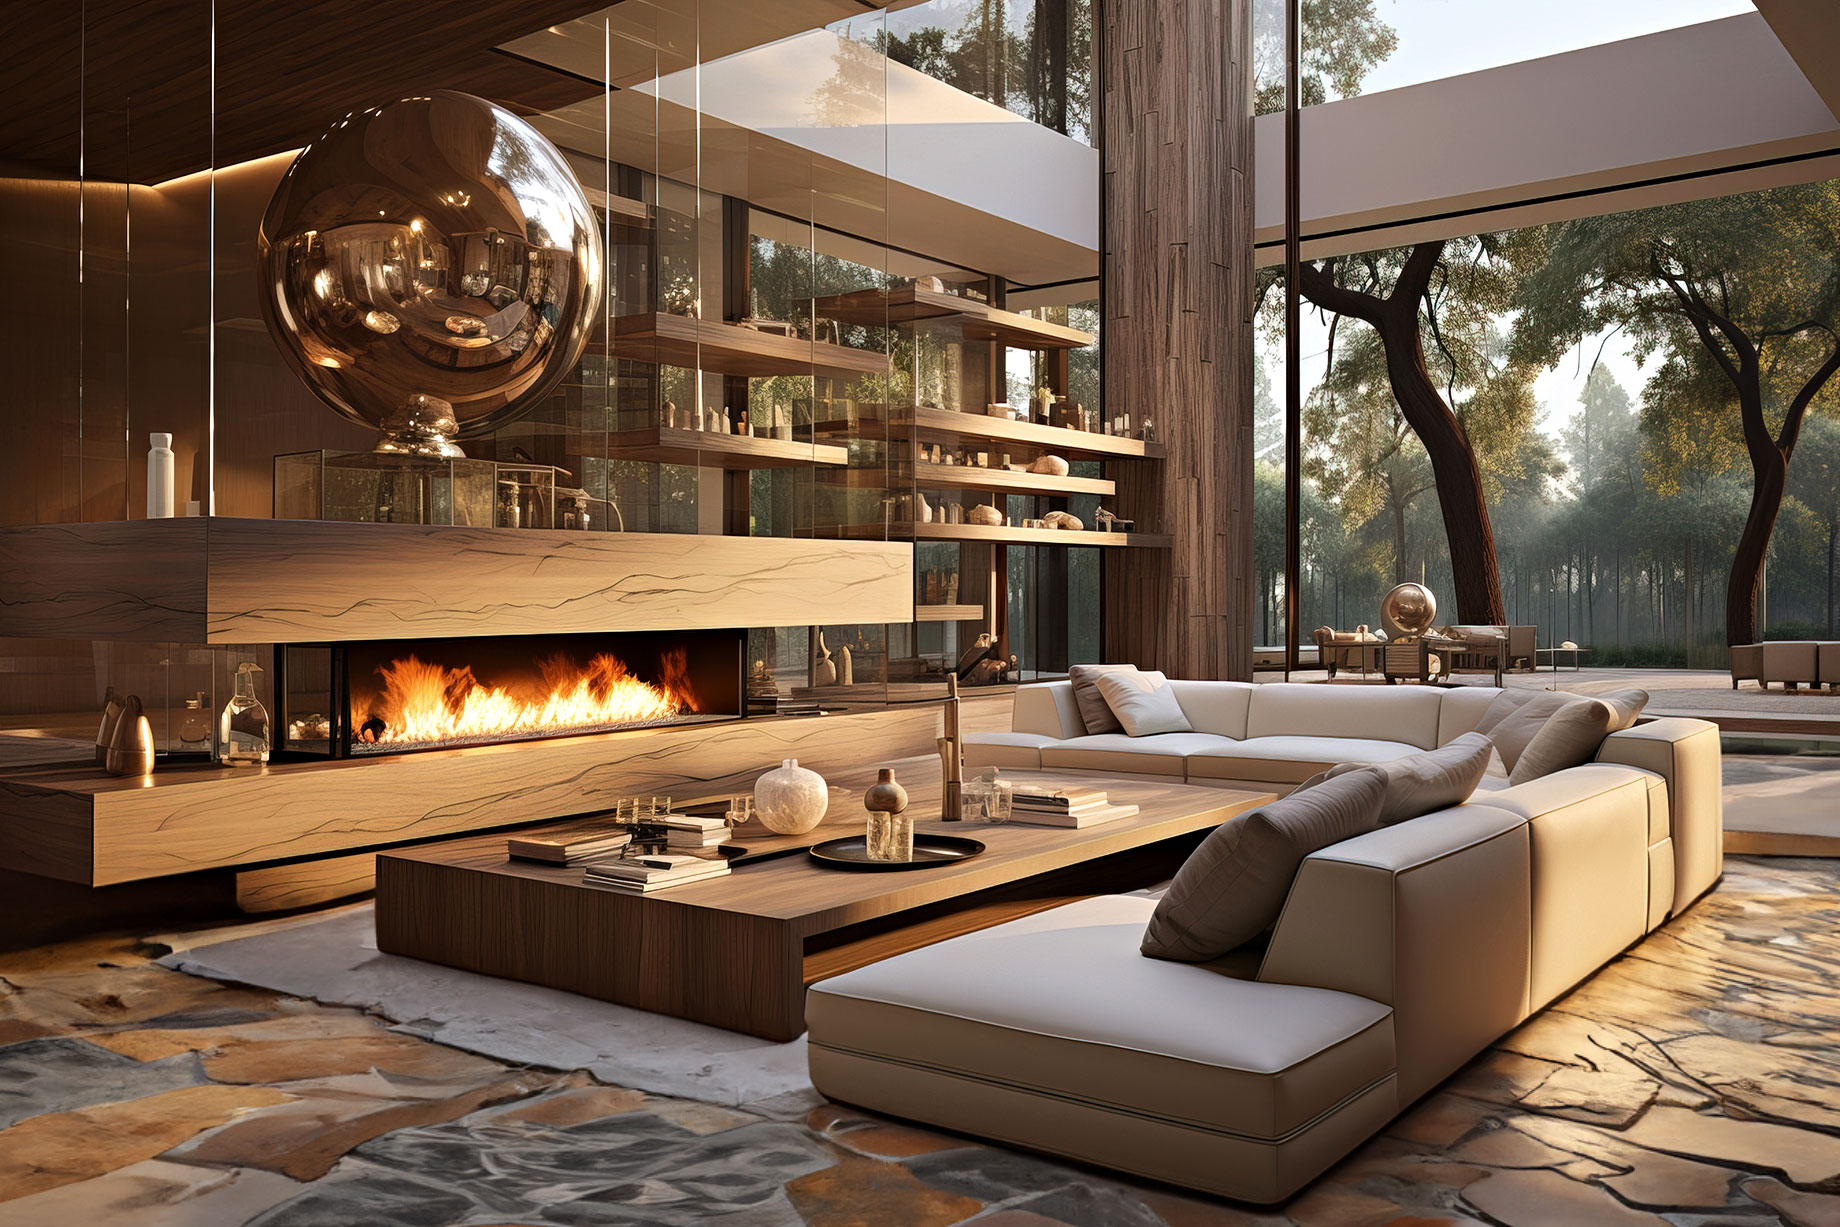 Vintage Modern Fusion - Luxury Modern Living Room with a Fireplace, Sofa, and Opulent Decor